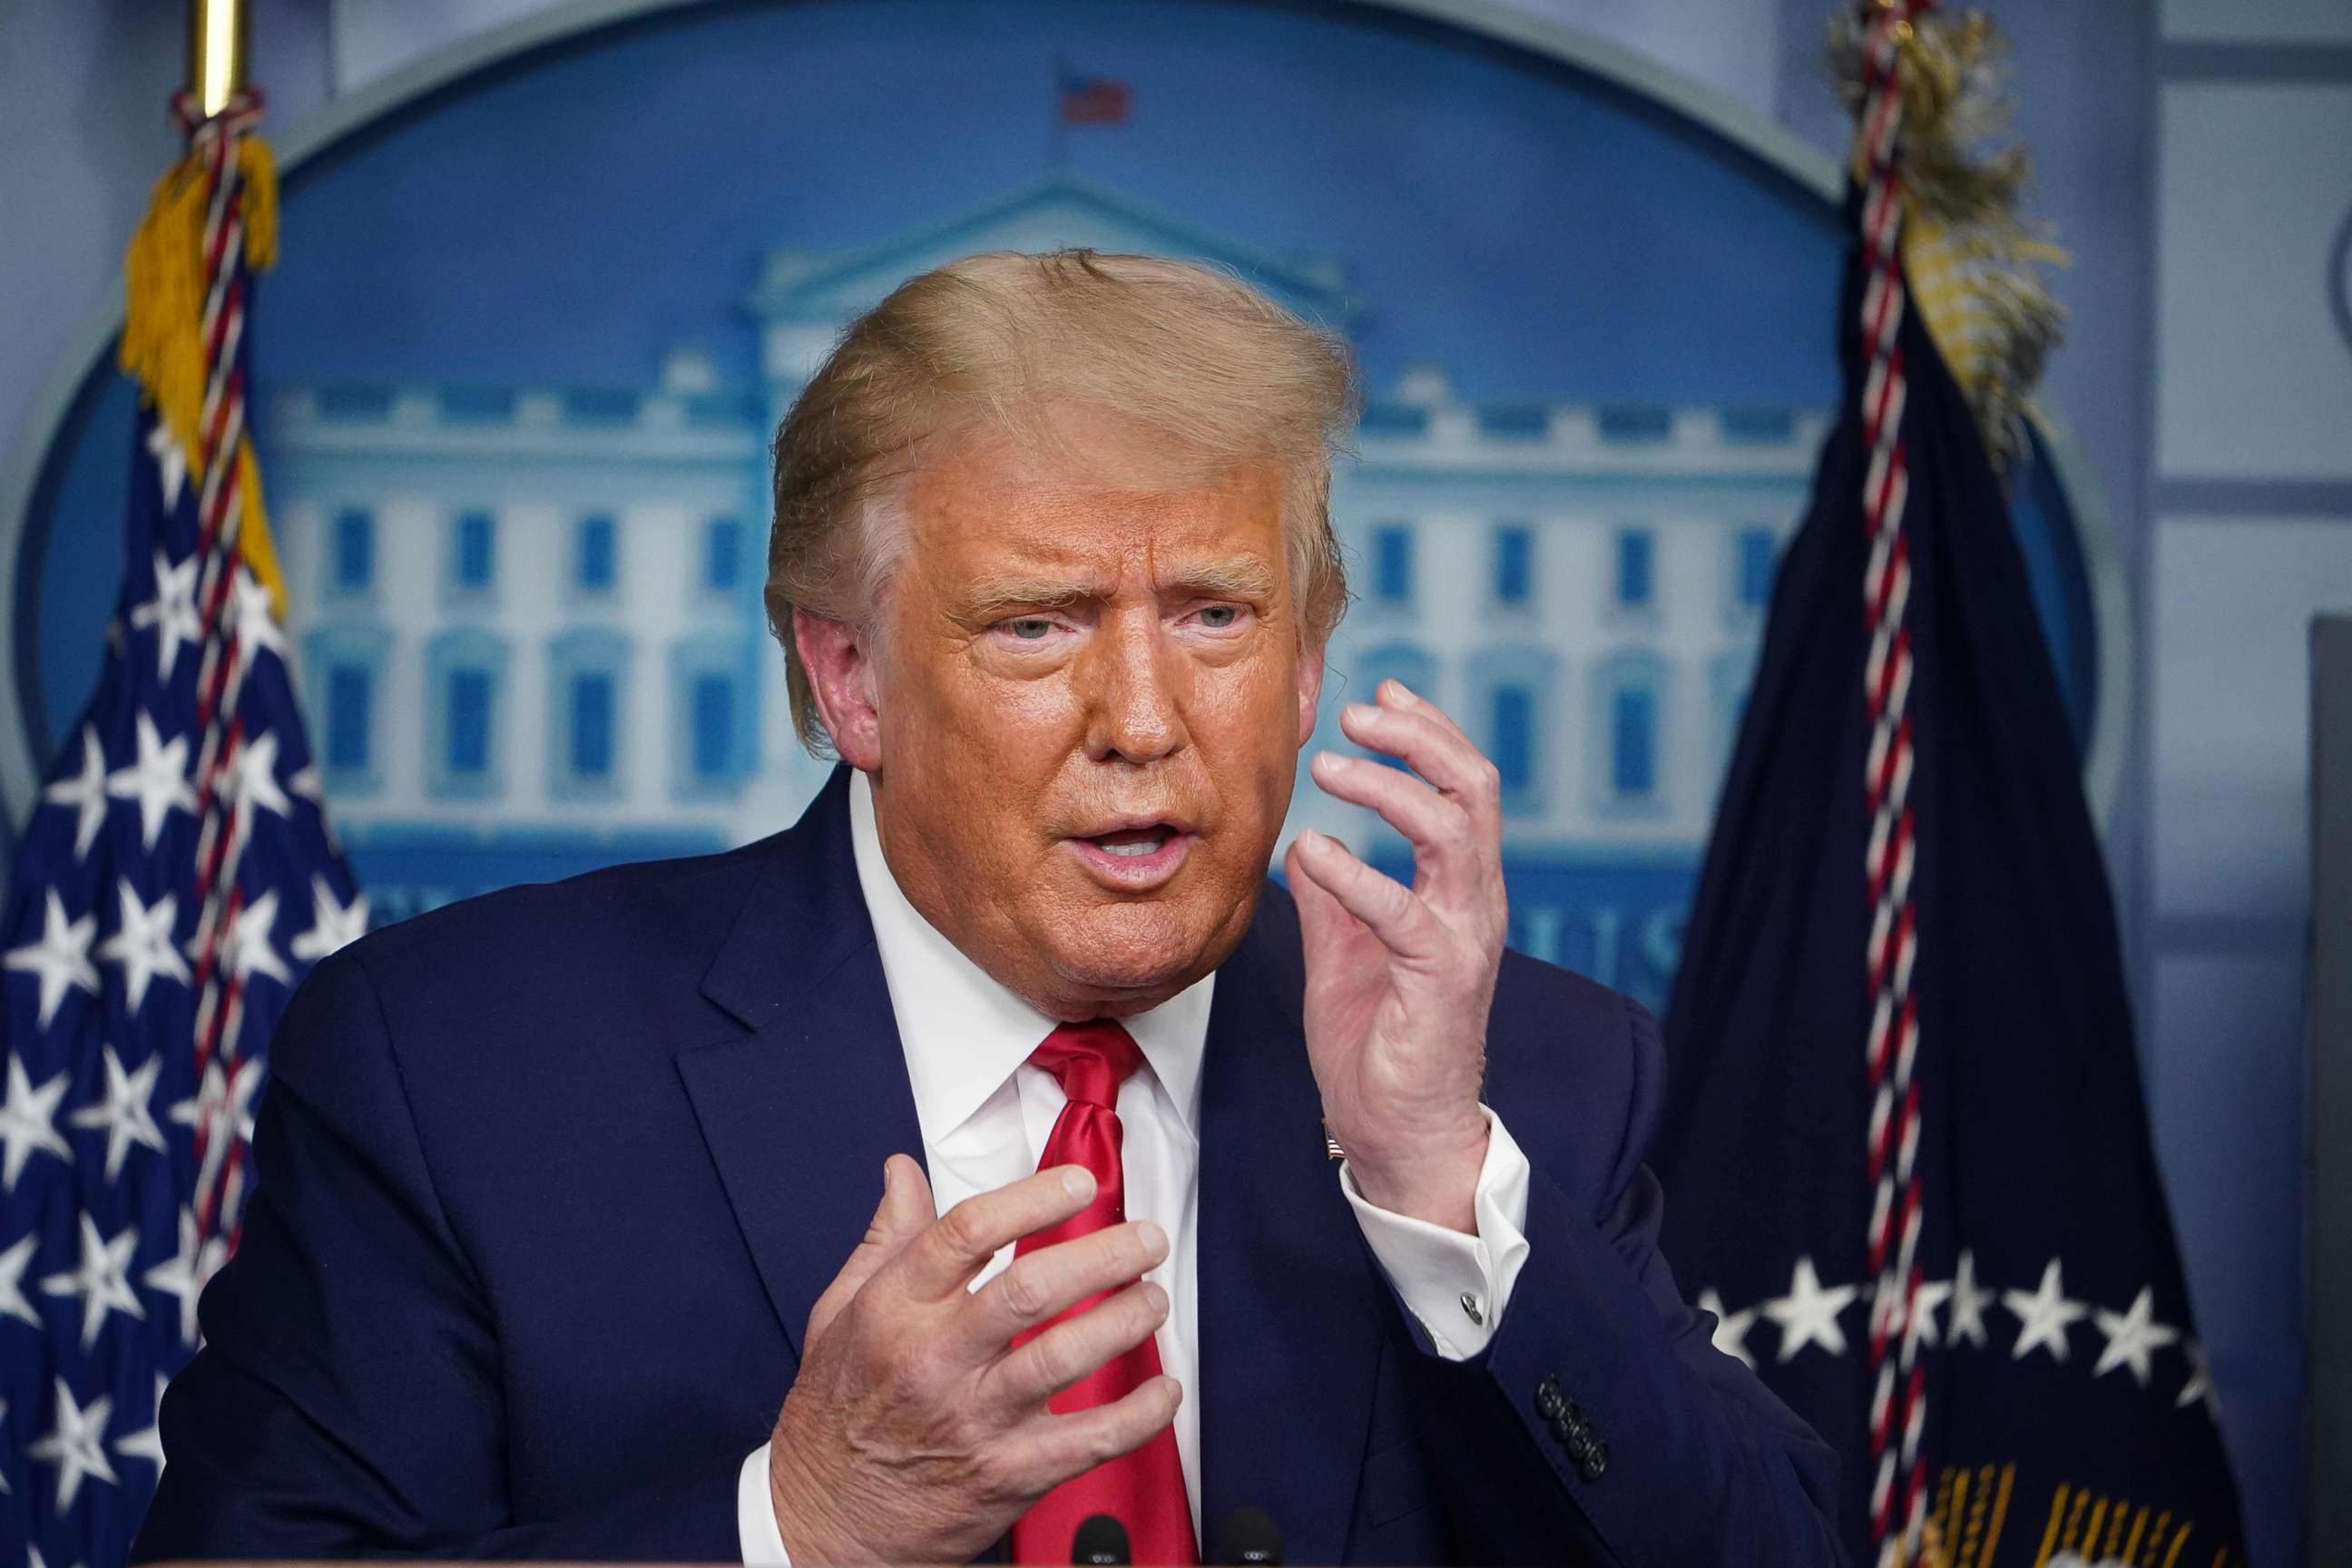 PHOTO: President Donald Trump gestures as he speaks about masks during a press conference in the Brady Briefing Room of the White House on Sept. 16, 2020, in Washington.